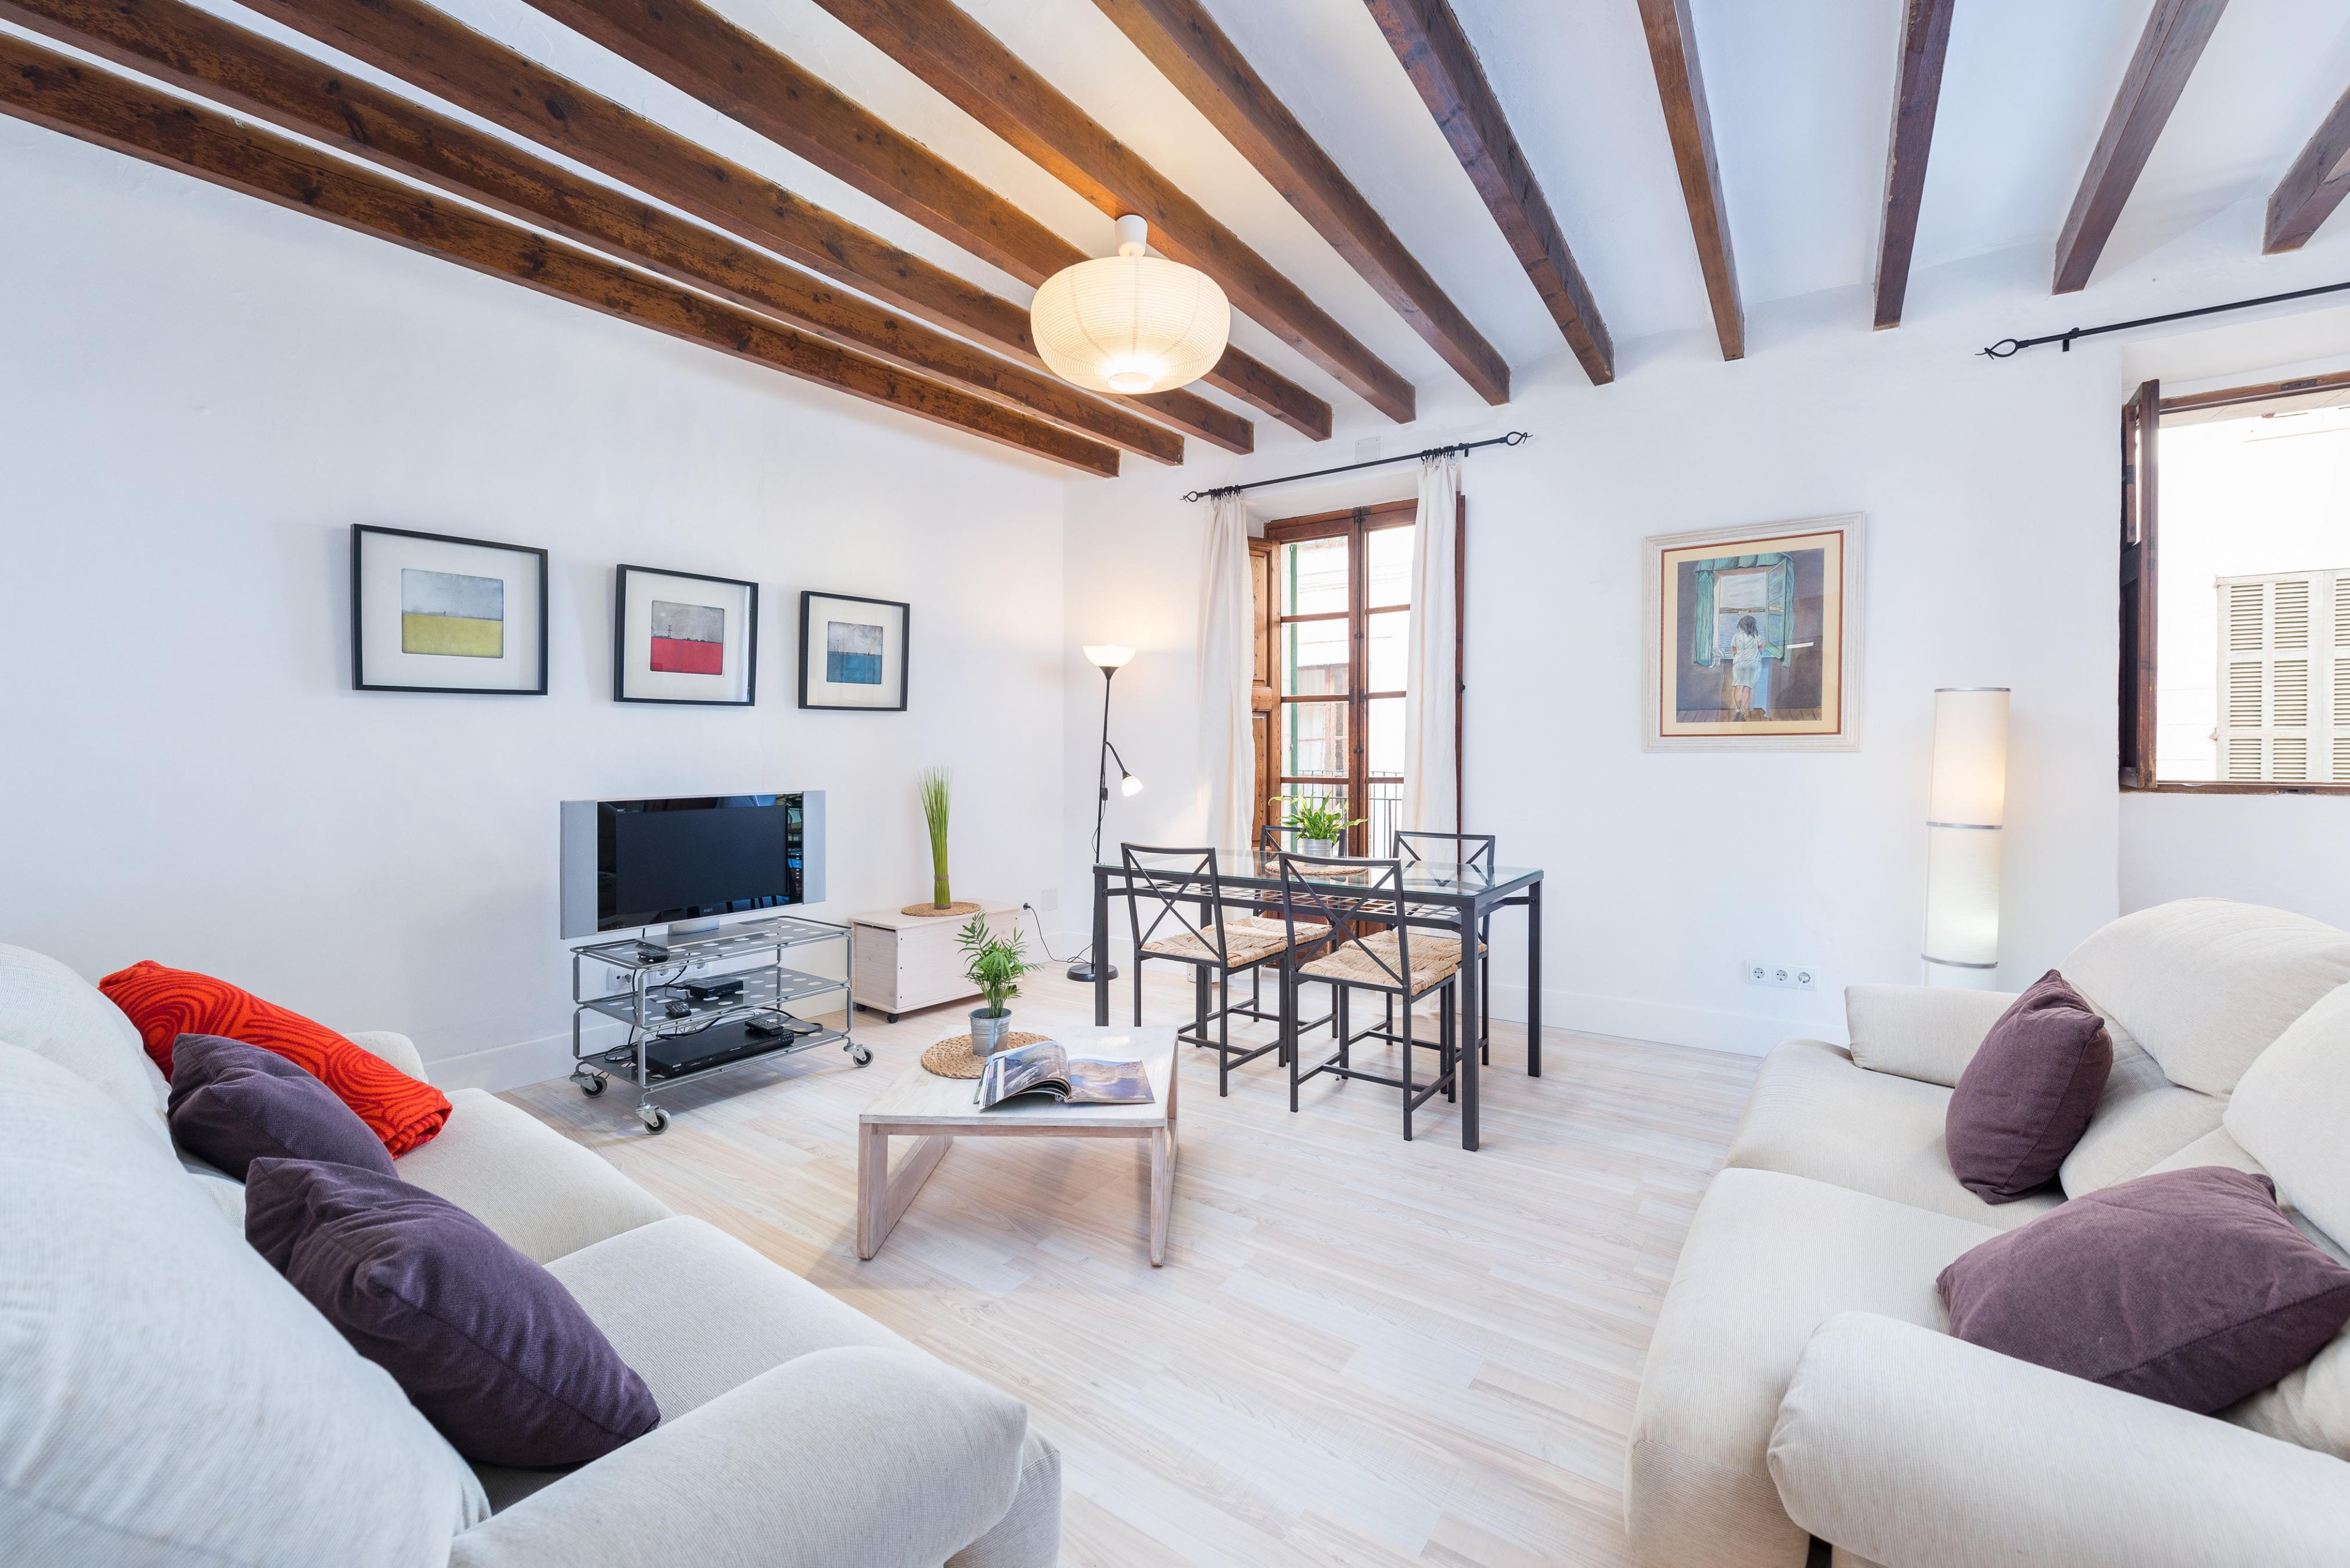 Property Image 2 - CASA MERCAT - Apartment for couples in Pollença. Free WiFi